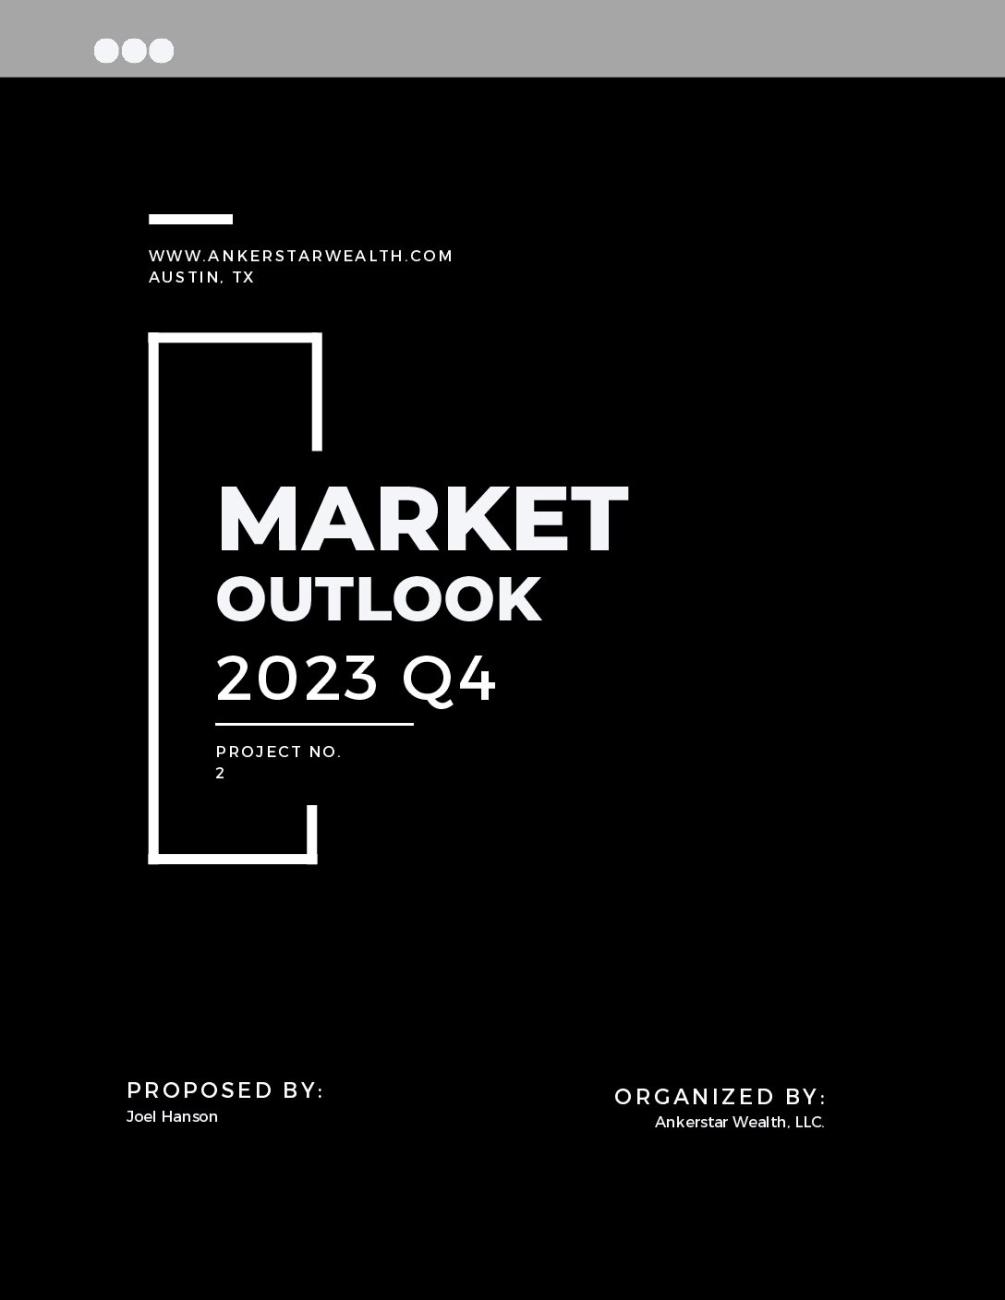 LPL Weekly Market Commentary and Outlook | Ankerstar Wealth